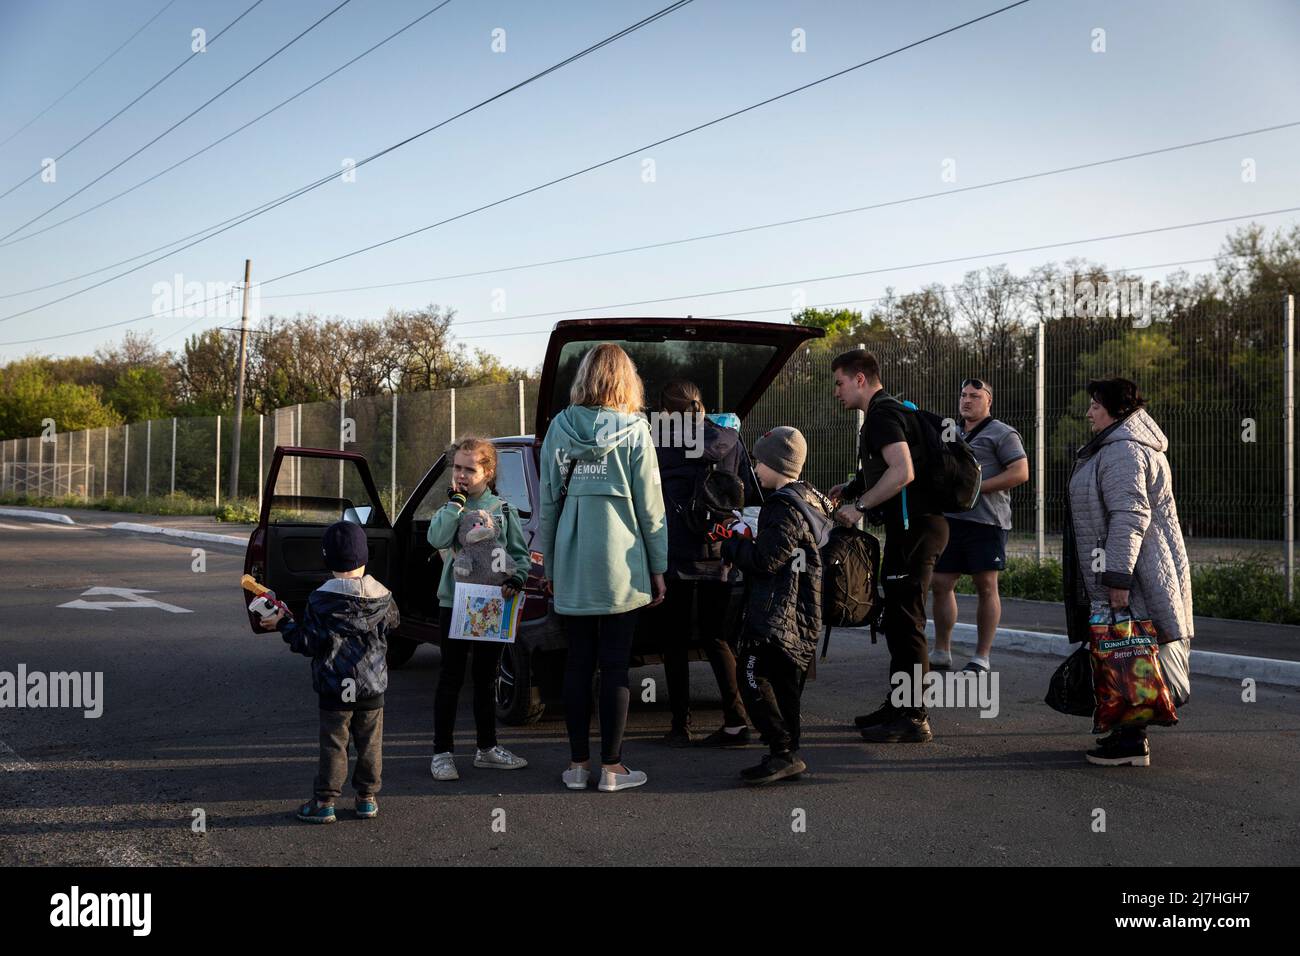 Sophia (L1, 7), Igor (L3, 8) Sergei (L4, 2.5) pack their belongings in the car with their parents as they depart to other cities after arriving in Zaporizhia from Kherson. Amid the intensified war crisis in Southeast Ukraine, millions of Ukrainian families have now been evacuated from the war zones and Russia controlled territories to Ukraine controlled territories, Zaporizhia.According to the United Nations, more than 11 million people are believed to have fled their homes in Ukraine since the conflict began, with 7.7 million people displaced inside their homeland. Stock Photo